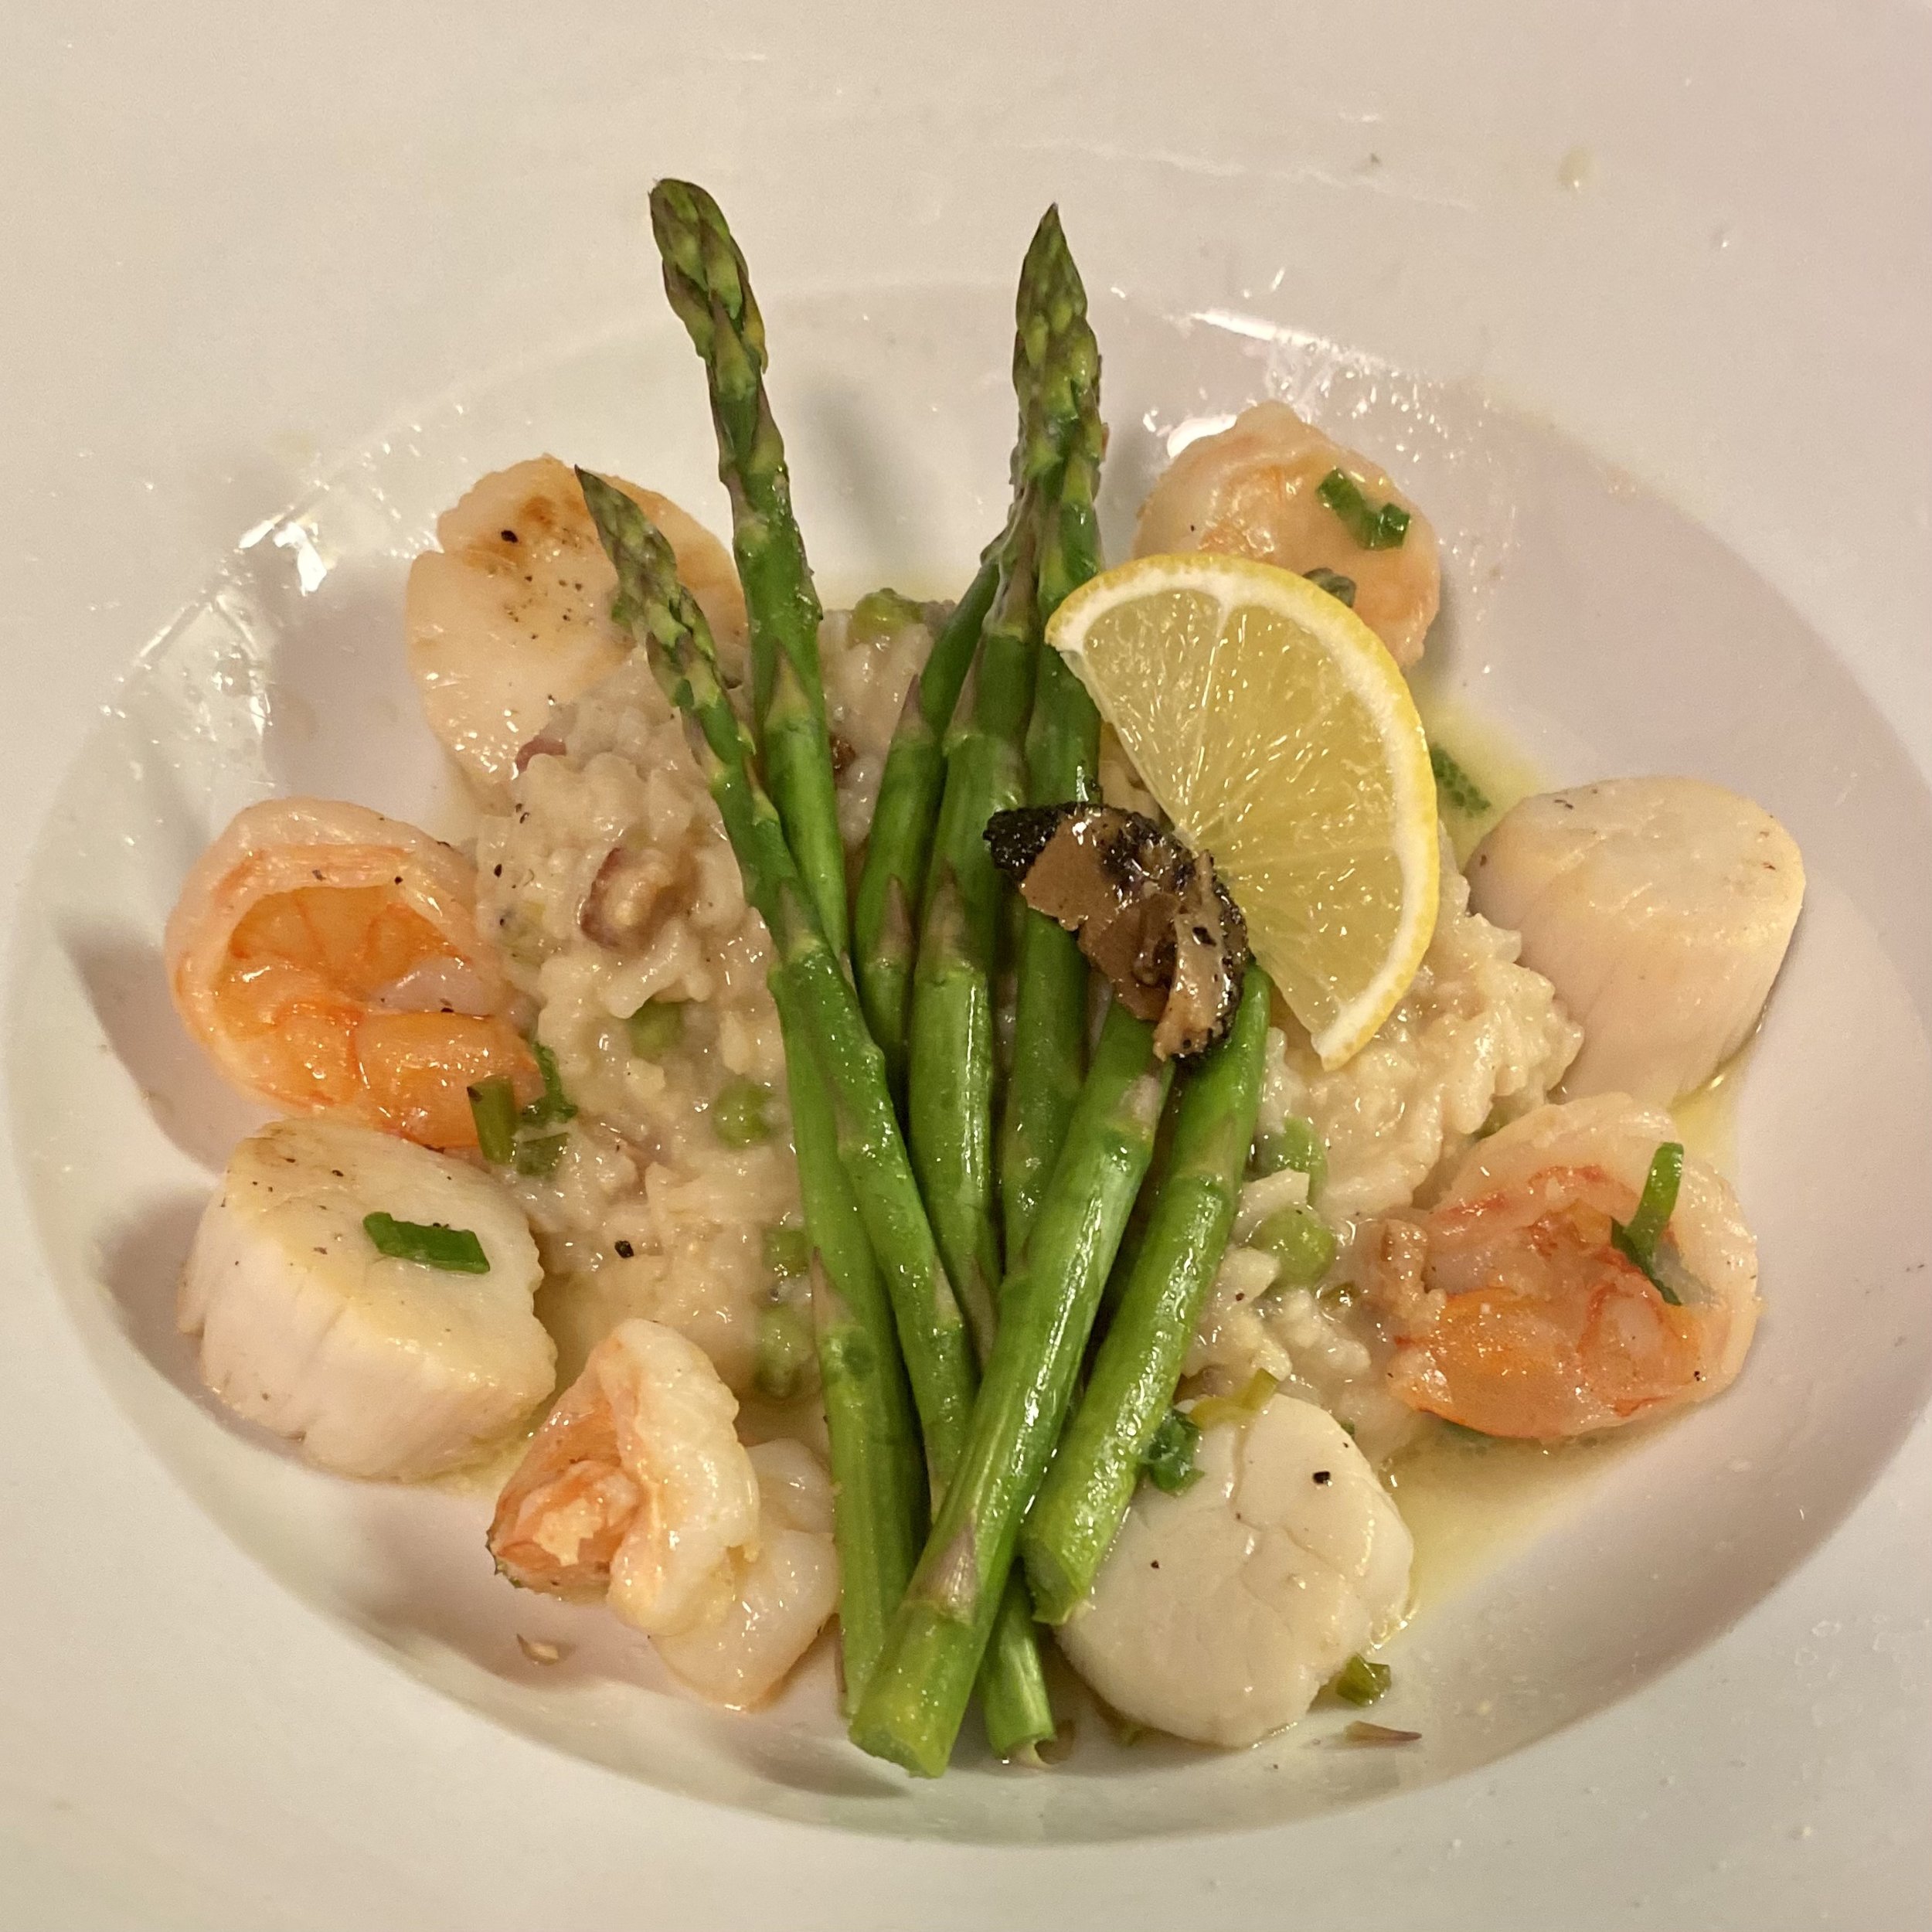 Gourmet Healthy-Eating Delight: Scallops and shrimp risotto with asparagus by Eden Healthy Private Catering